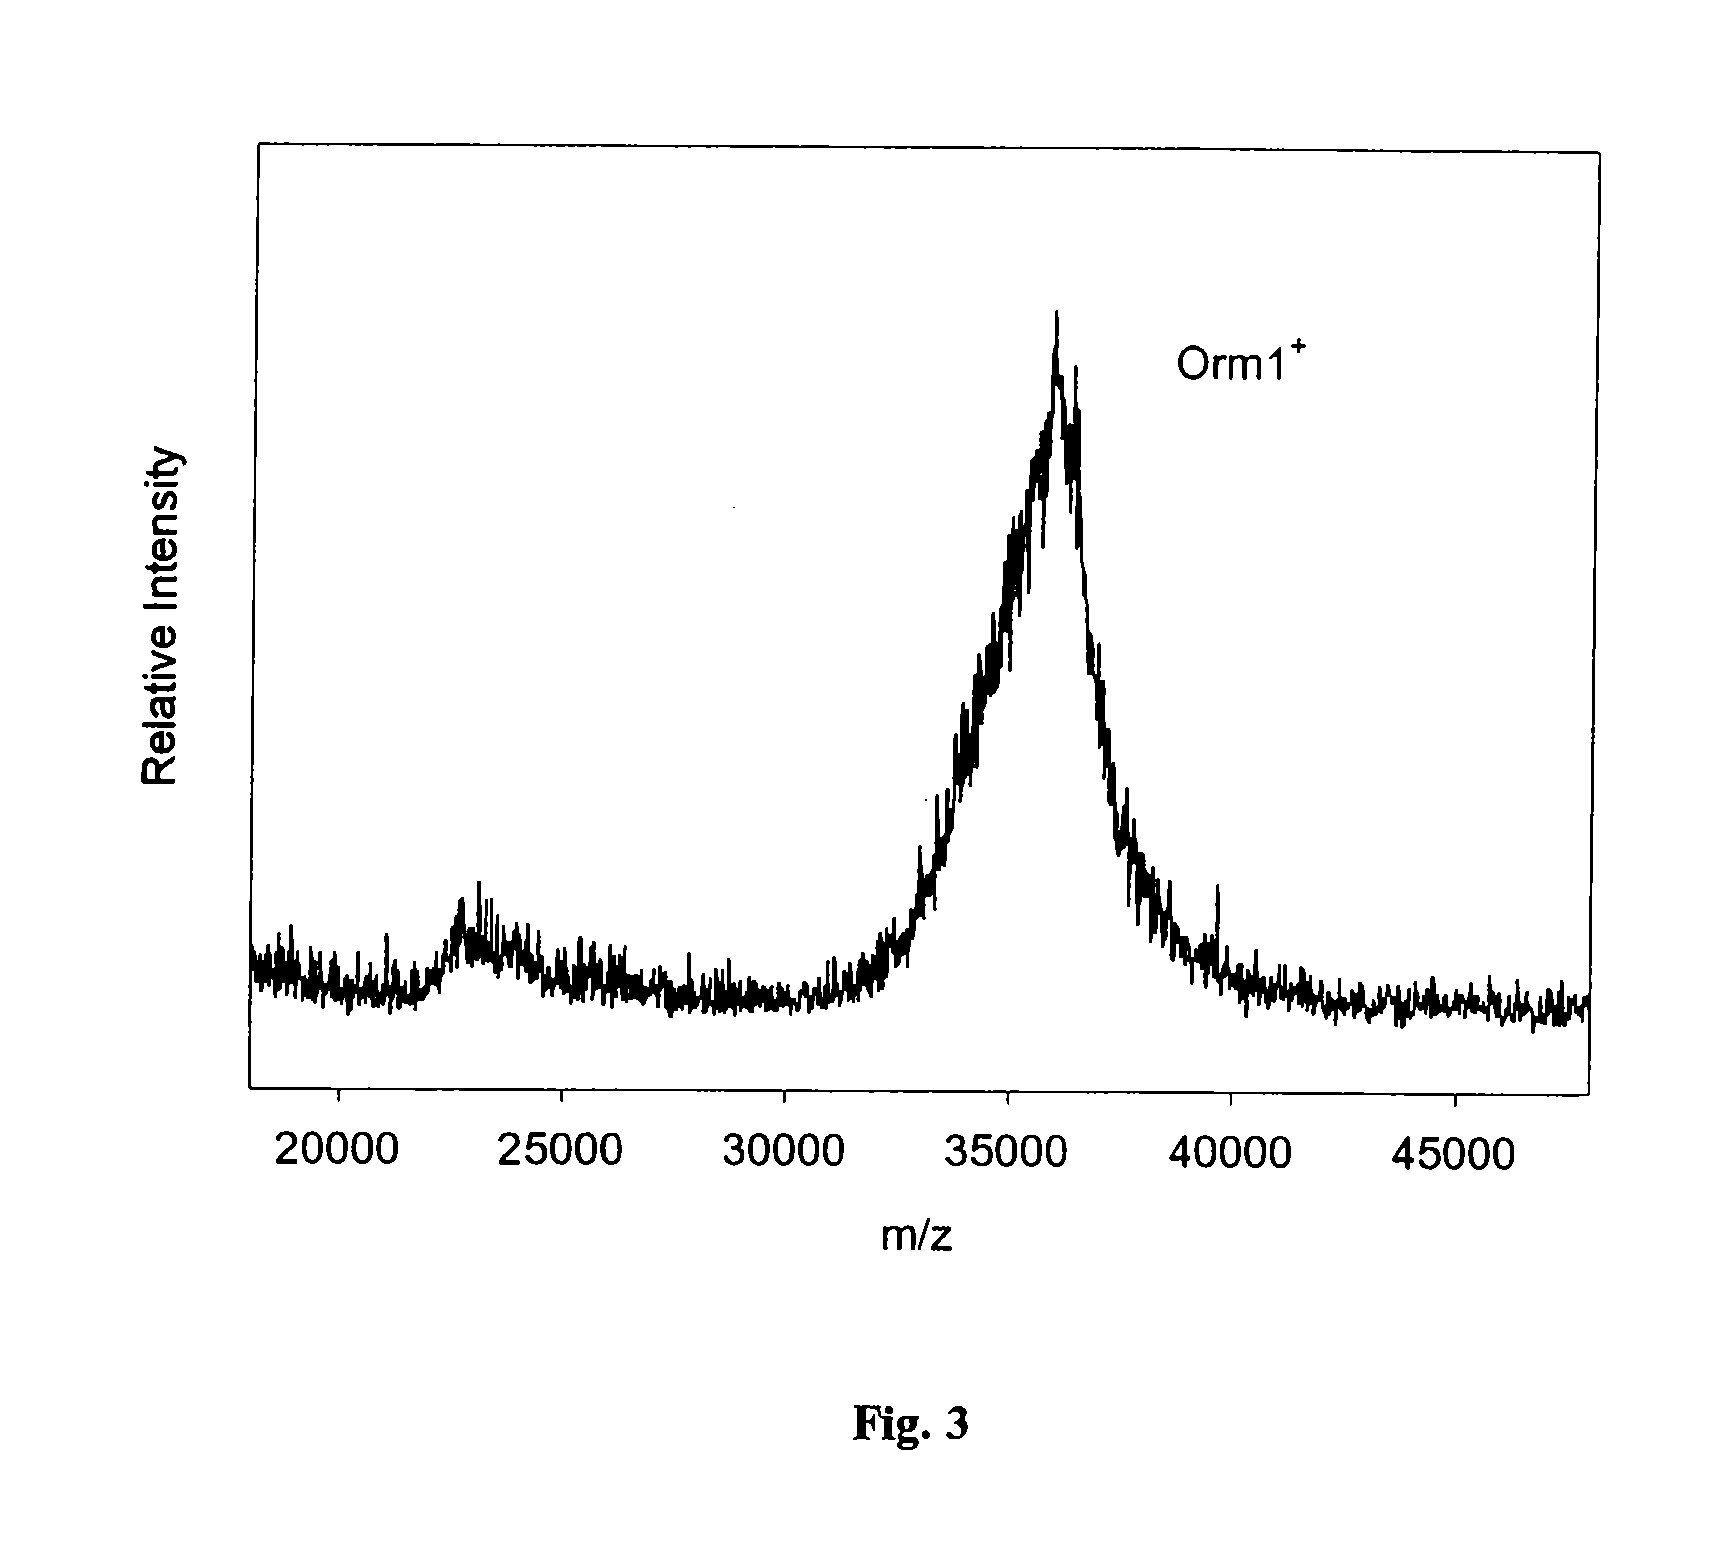 Method and apparatus for mass spectrometric immunoassay analysis of specific biological fluid proteins